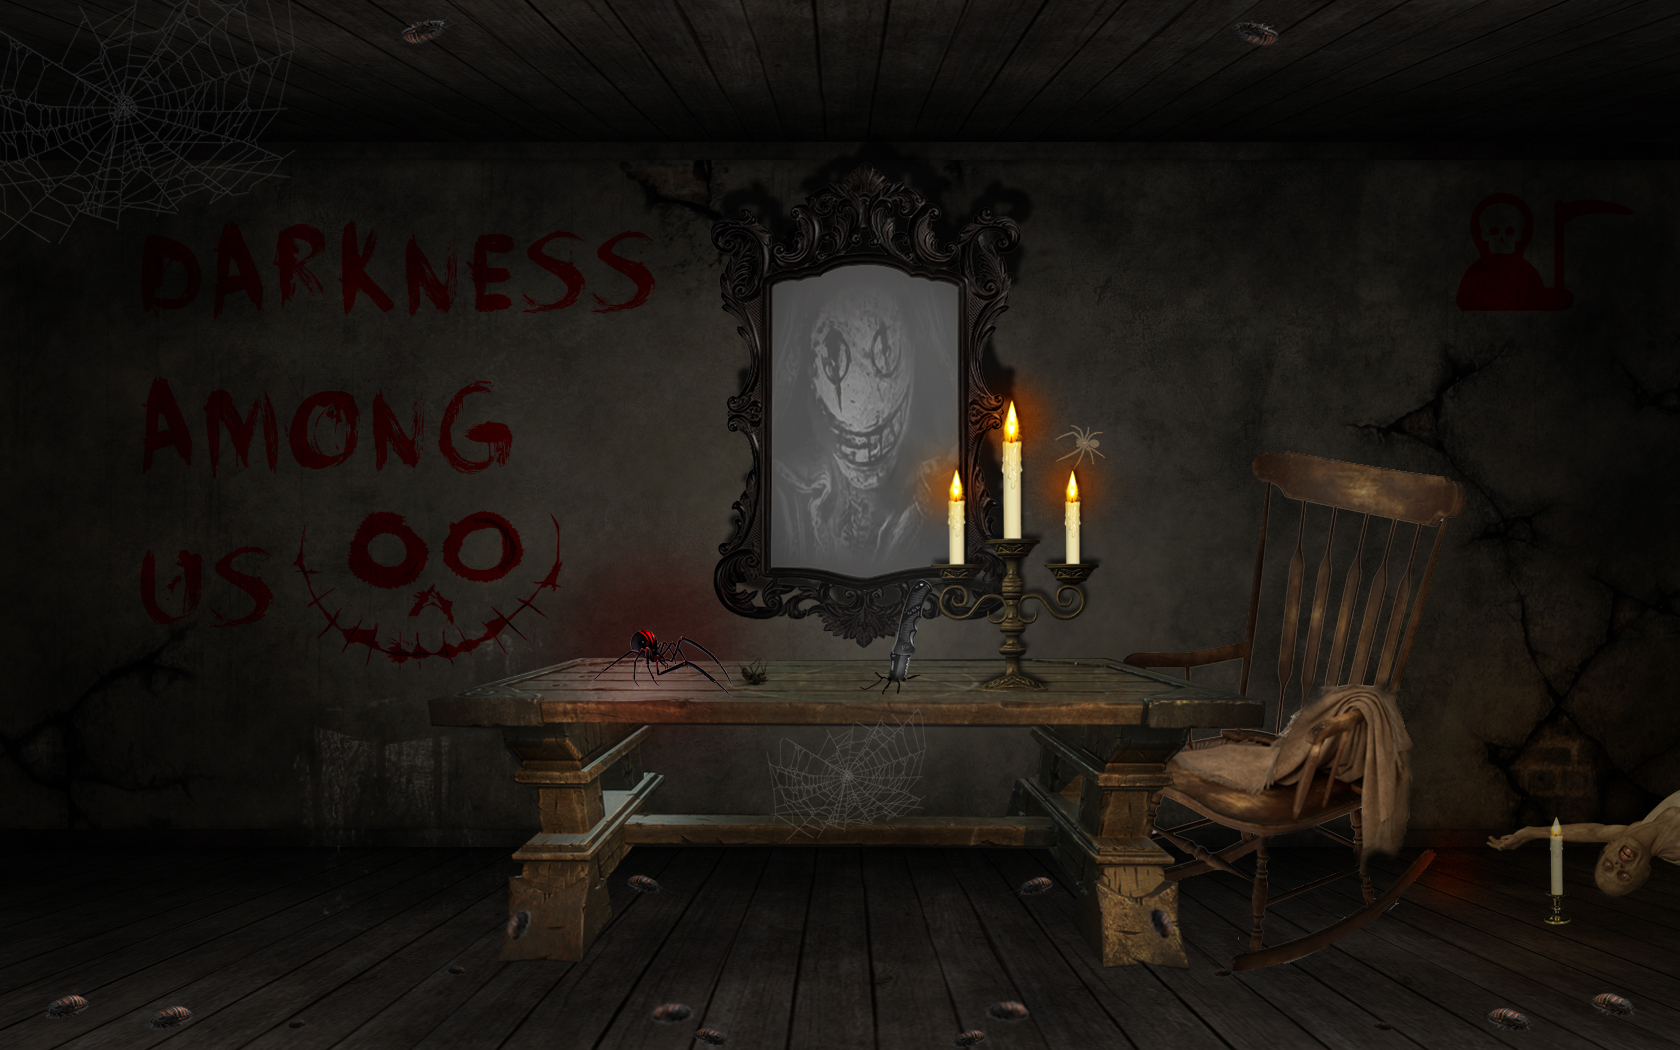 Wallpaper, Dead by Daylight, blood, creepy, chair, candles, table, horror, dead man, mirror, the widow spider, dark, room, web design 1680x1050